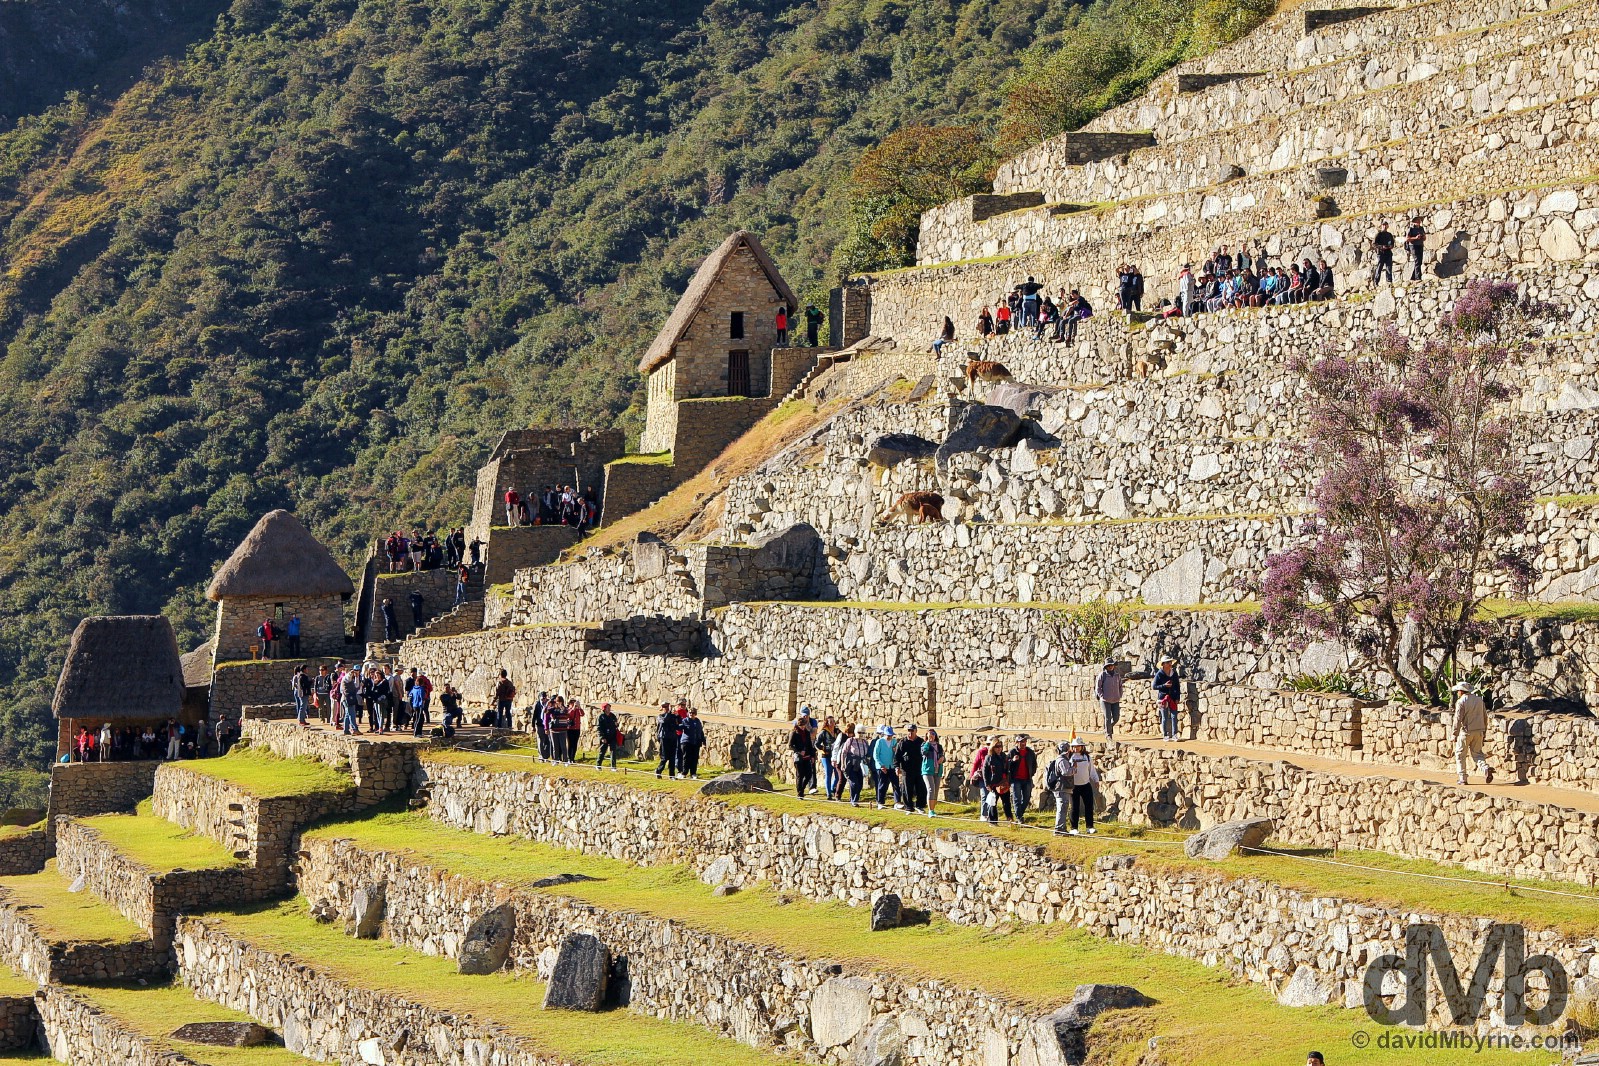  Shortly after sunrise on the terraces of the Eastern Agricultural Sector in Machu Picchu, Peru. August 15, 2015.